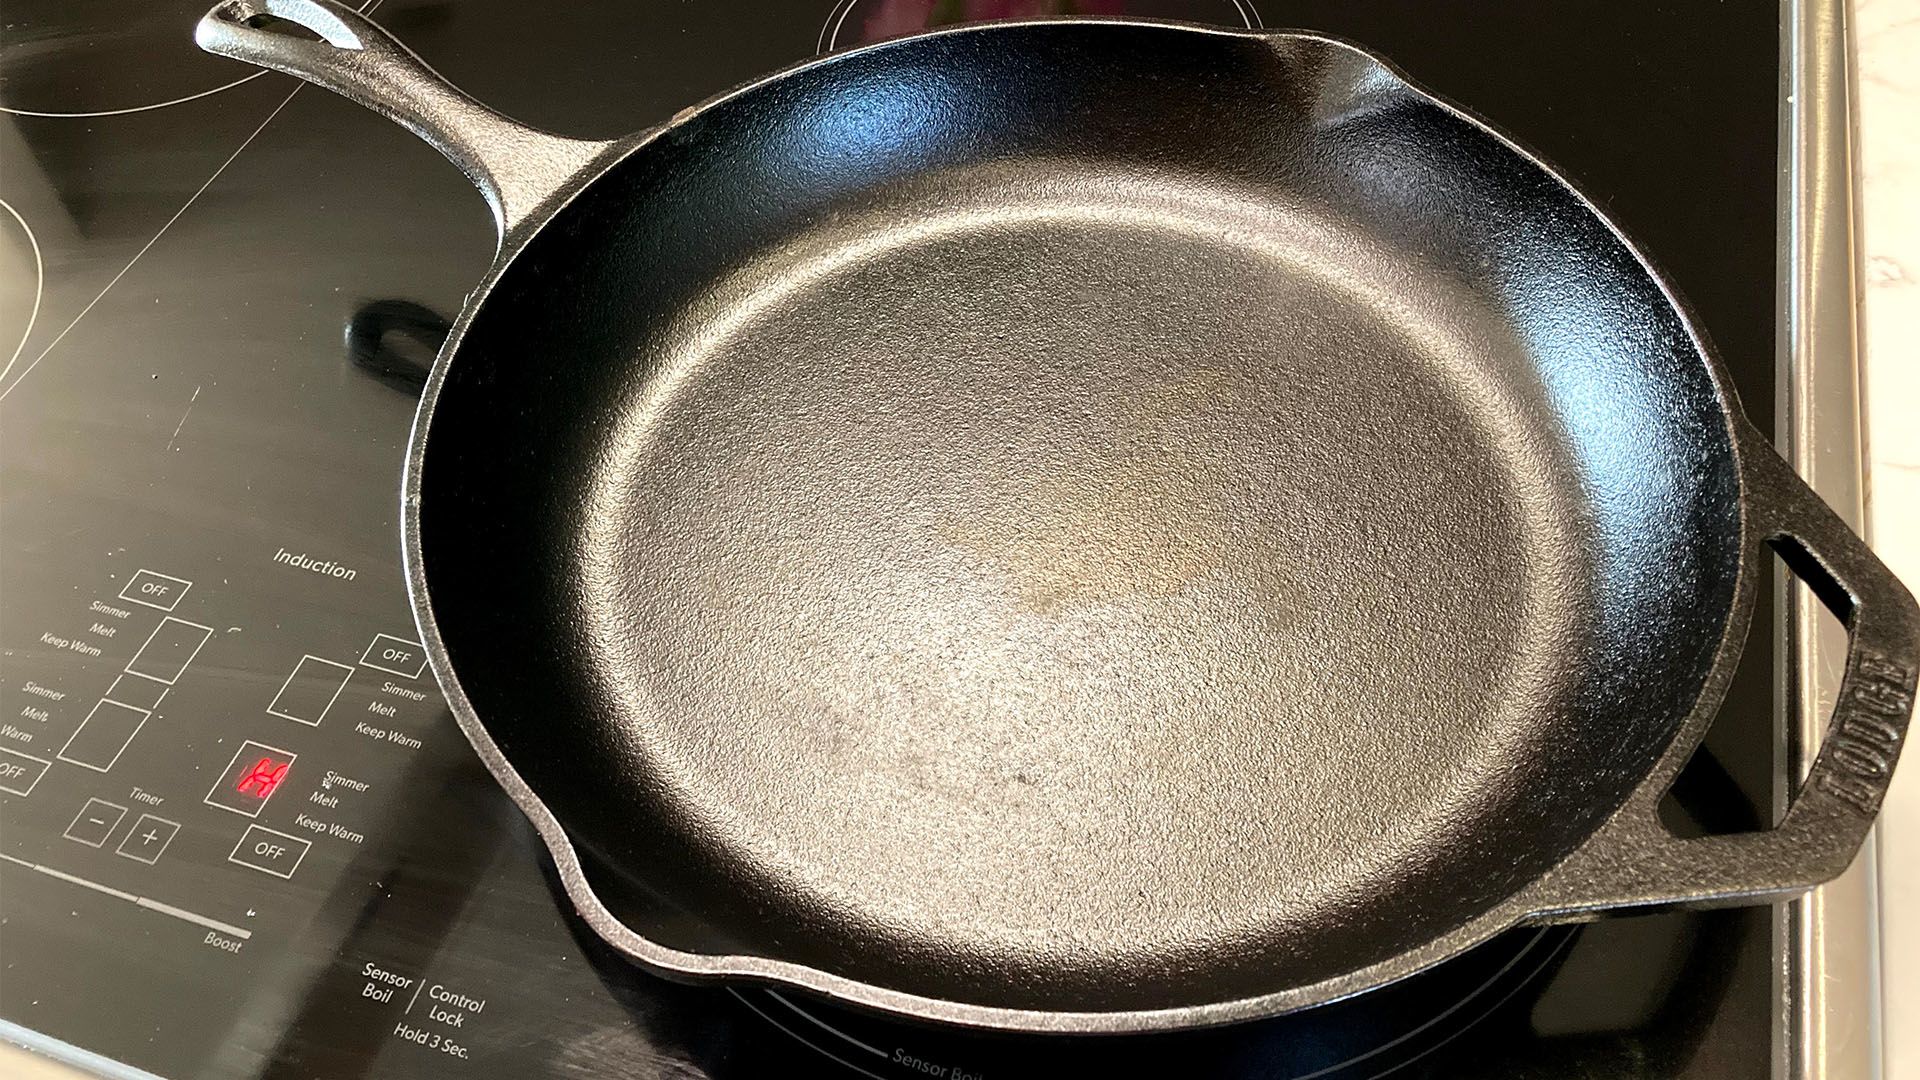 The 4 Best Cast Iron Pans, Tested and Reviewed